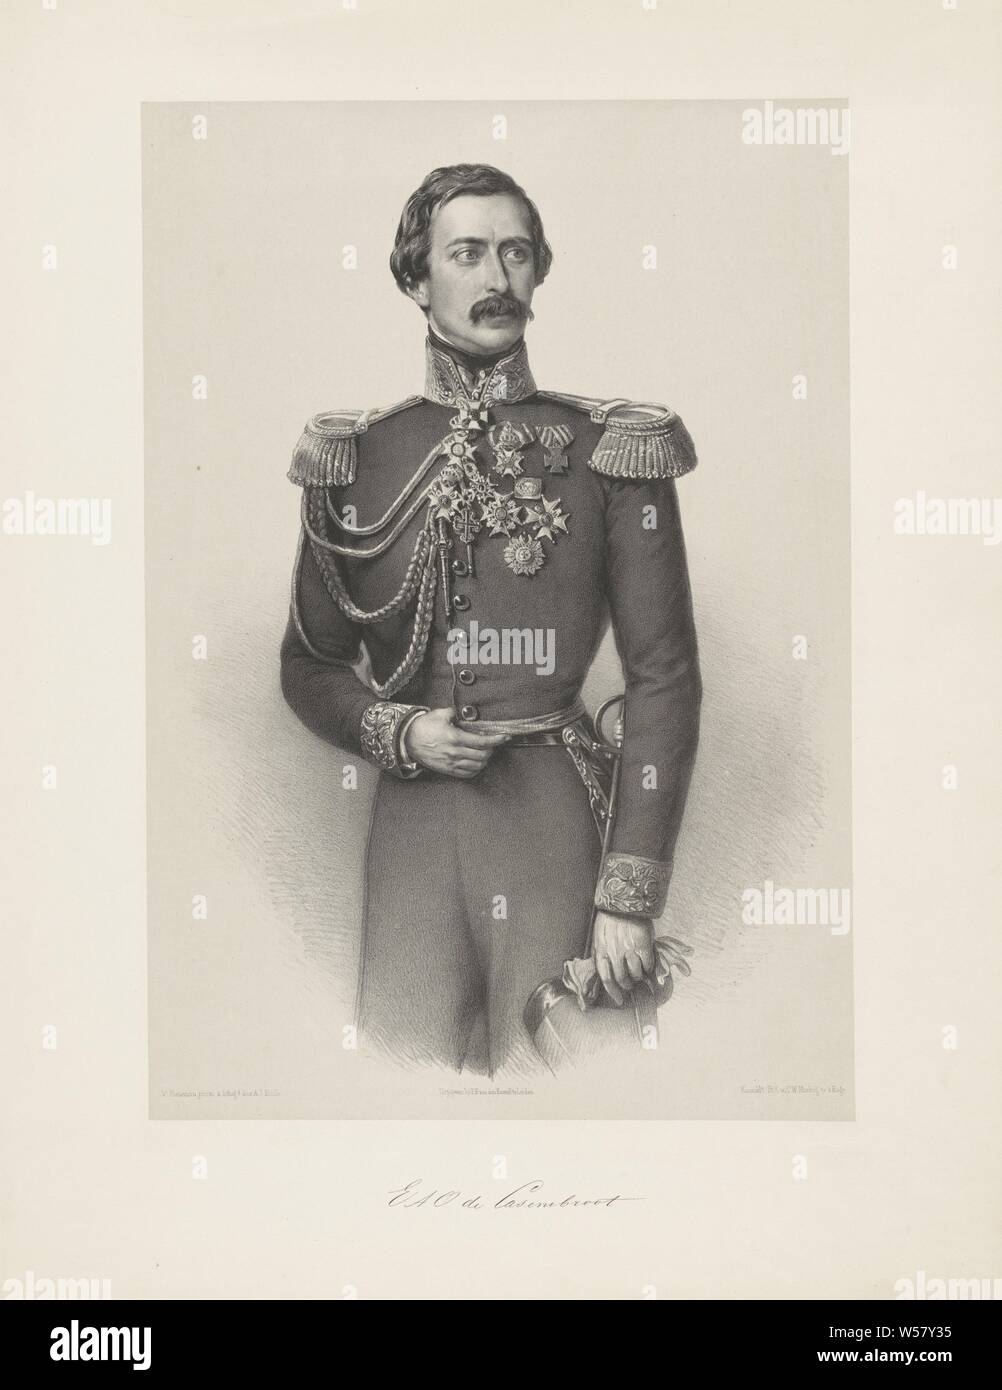 Portrait of Eduard August Otto de Casembroot, The person portrayed wears a military uniform and looks to the right. With his right hand he holds his belt, in his left hand he has his gloves and kepi. He wears awards on his chest and a saber on his belt. Under the portrait are signature., Historical persons (three-quarter length portrait), knighthood order, hacking and thrusting weapons (with NAME), Eduard August Otto de Casembroot, Adrianus Johannes Ehnle (mentioned on object), 1857 - 1863, paper, h 543 mm × w 420 mm Stock Photo